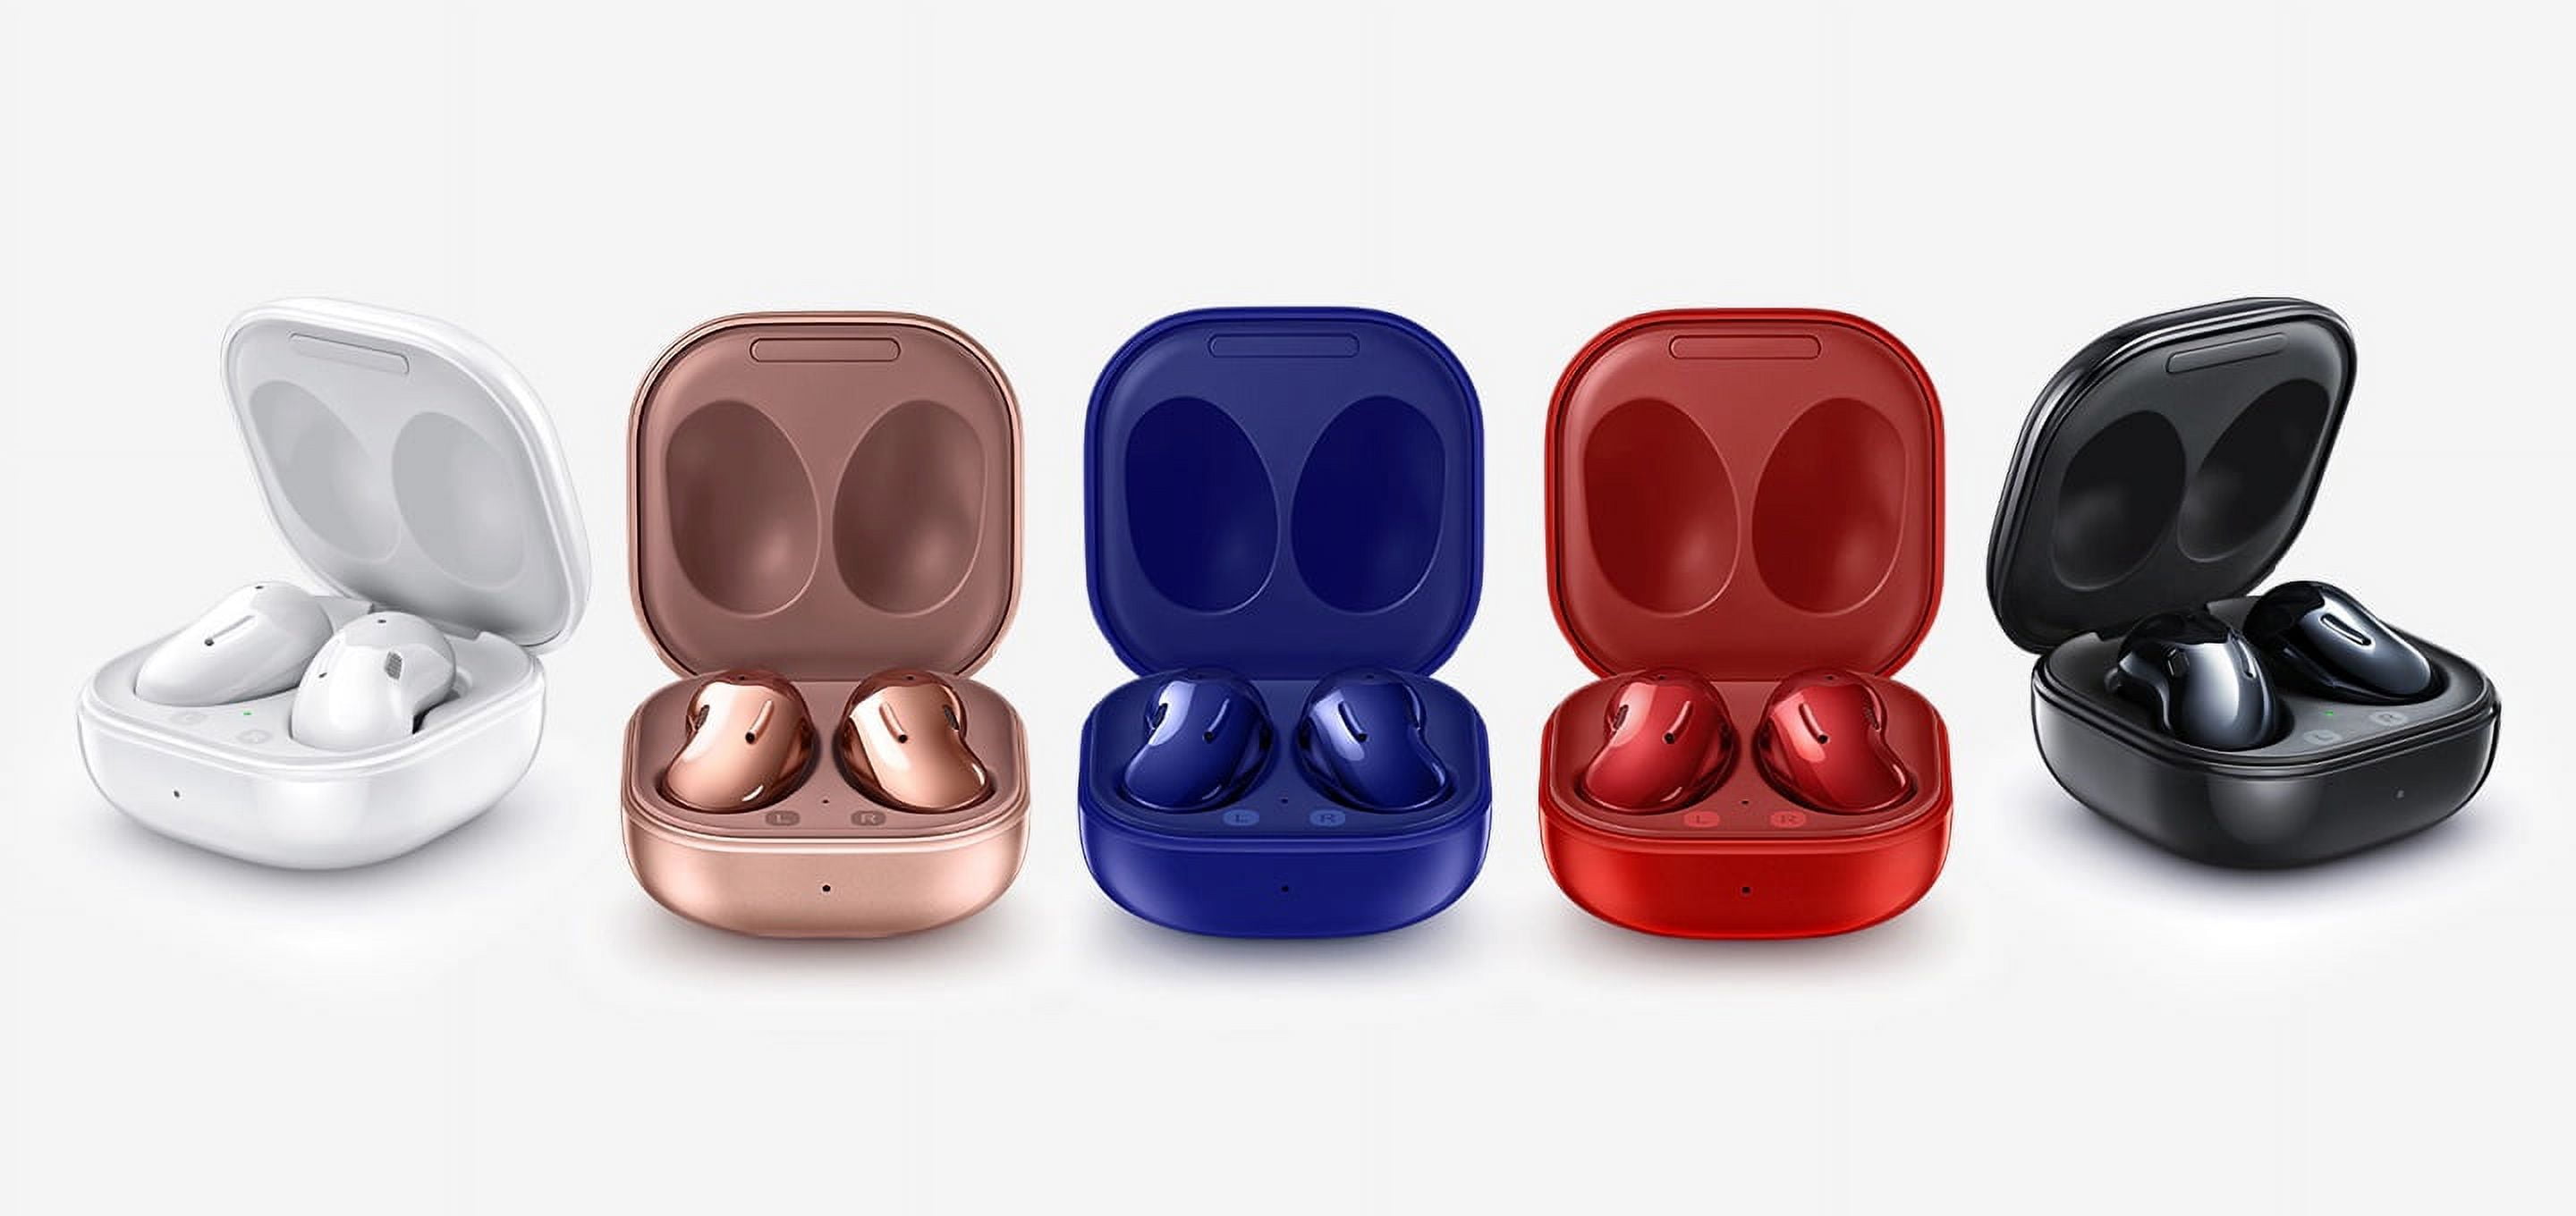 Samsung Galaxy Buds Live Wireless Earbuds with Charging Case